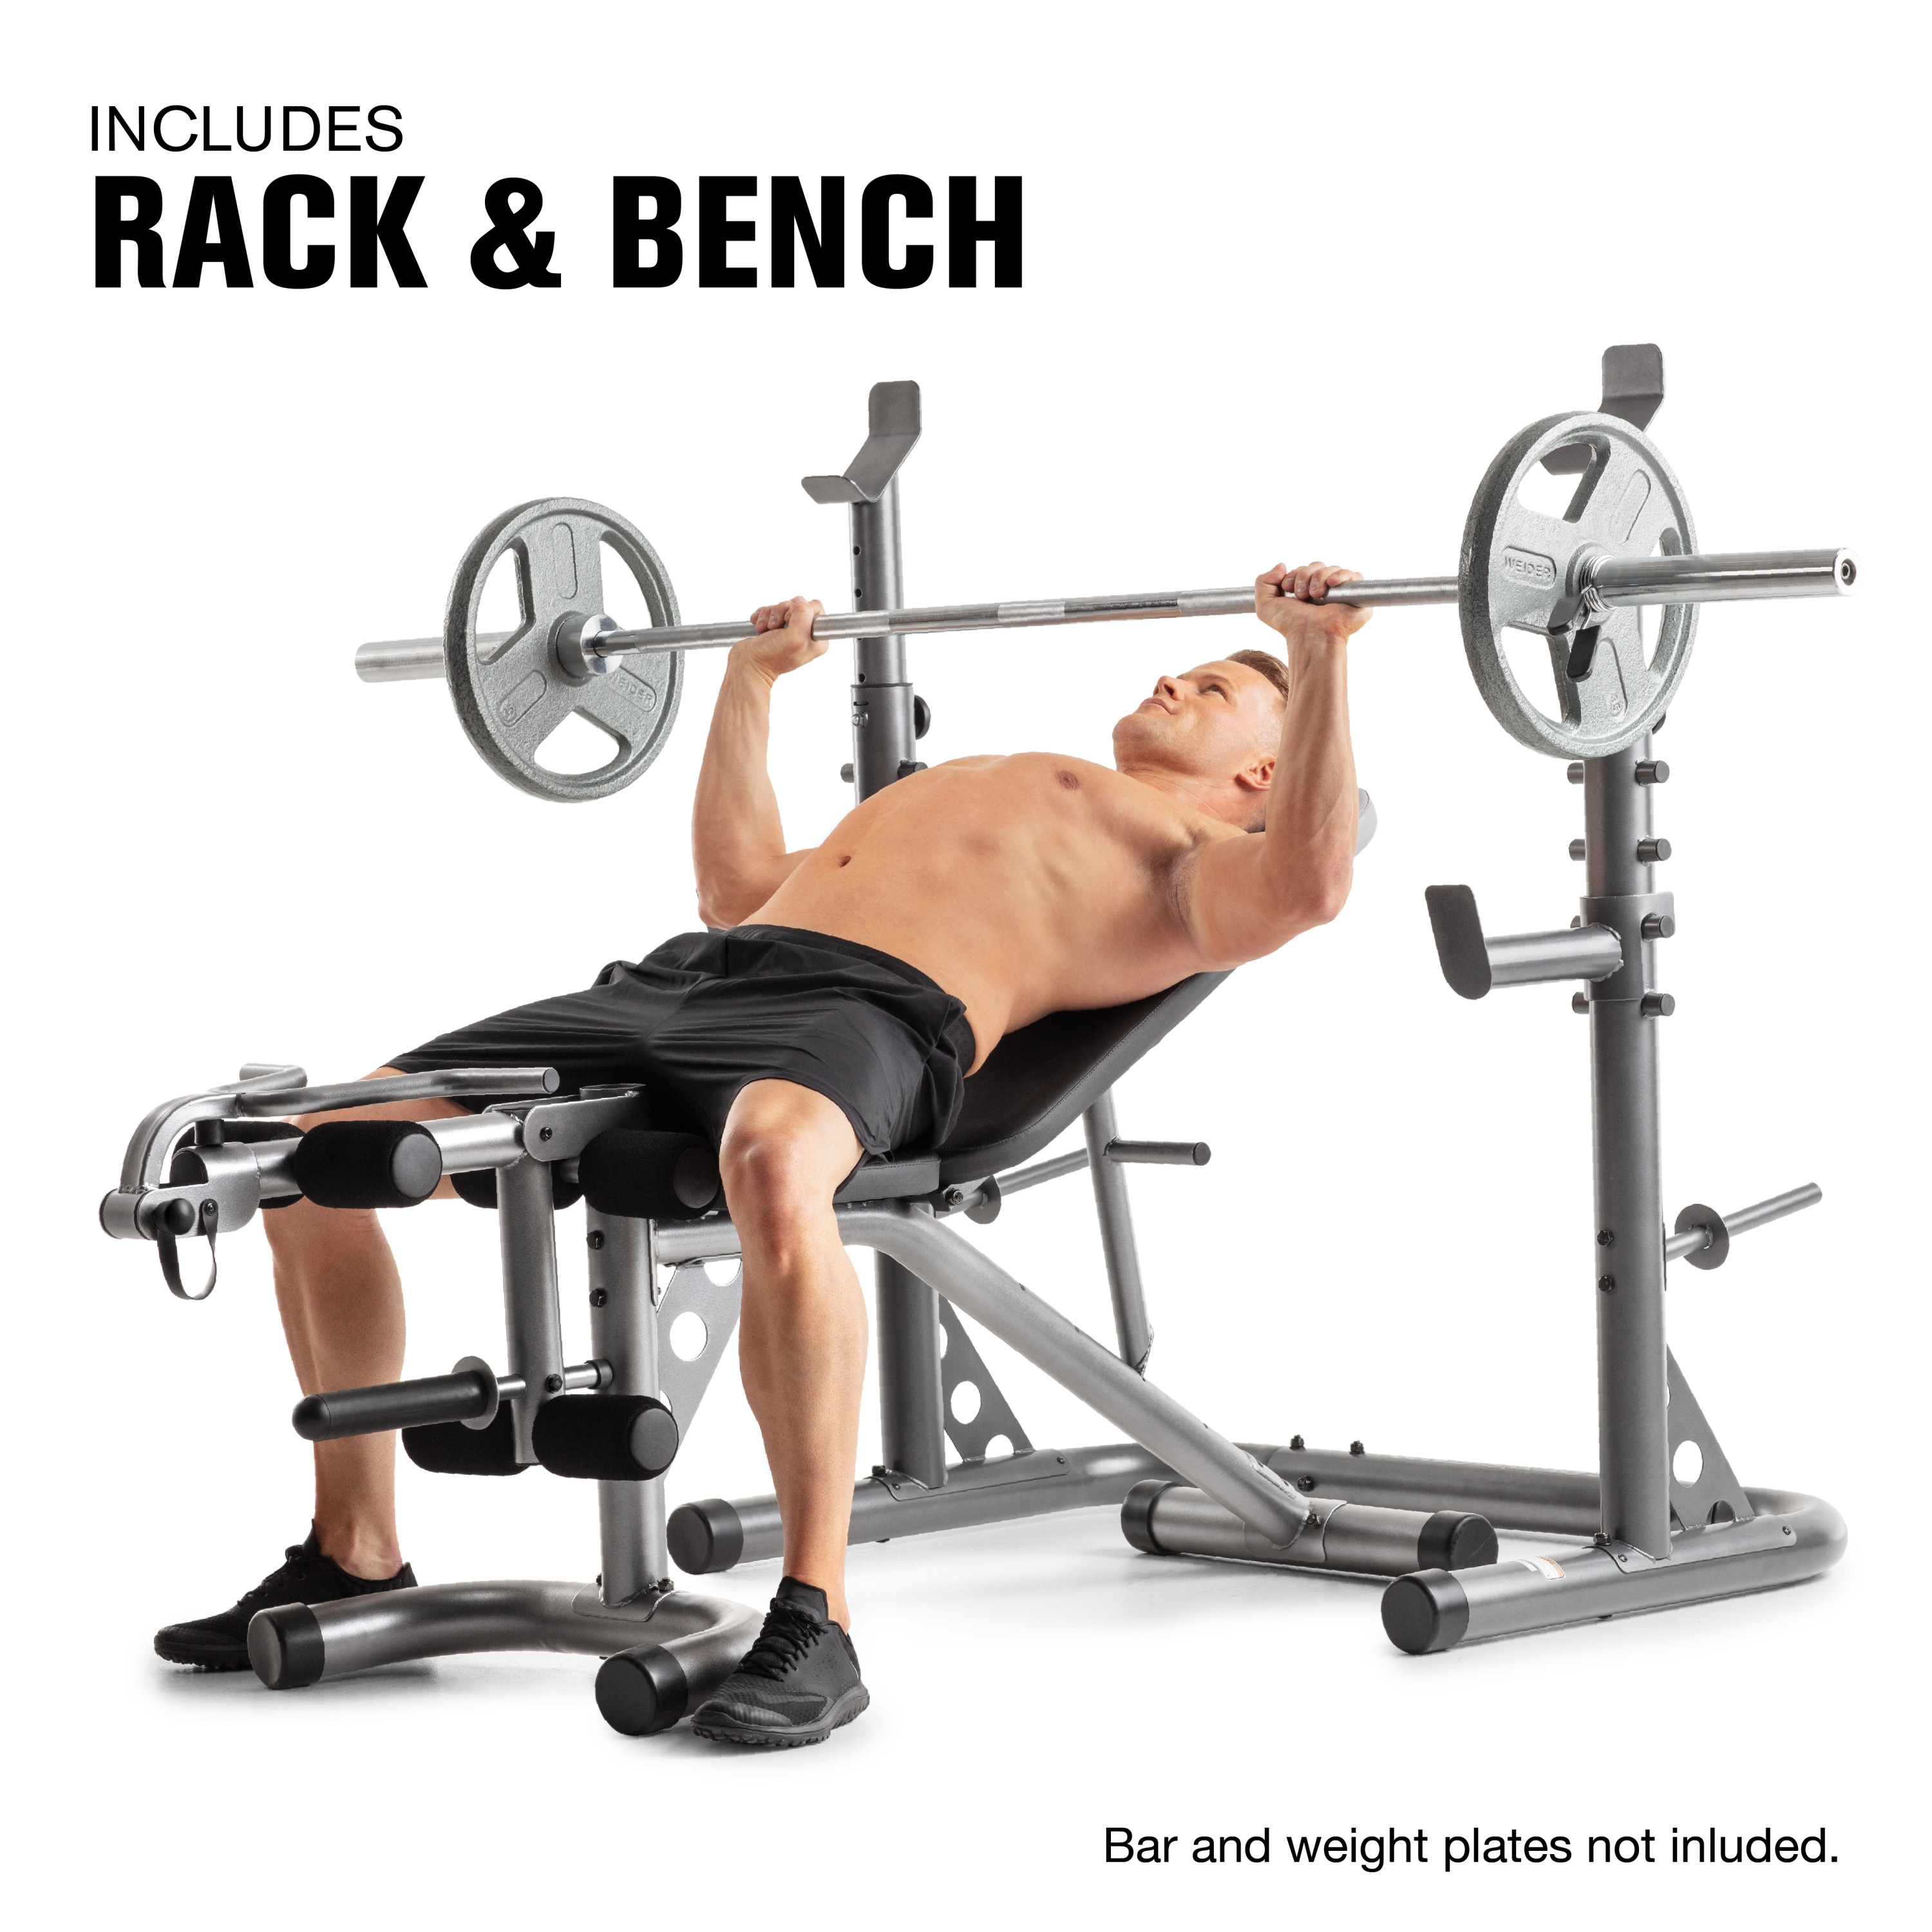 Weider XRS 20 Adjustable Bench with Olympic Squat Rack and Preacher Pad, 610 lb. Weight Limit - image 8 of 13